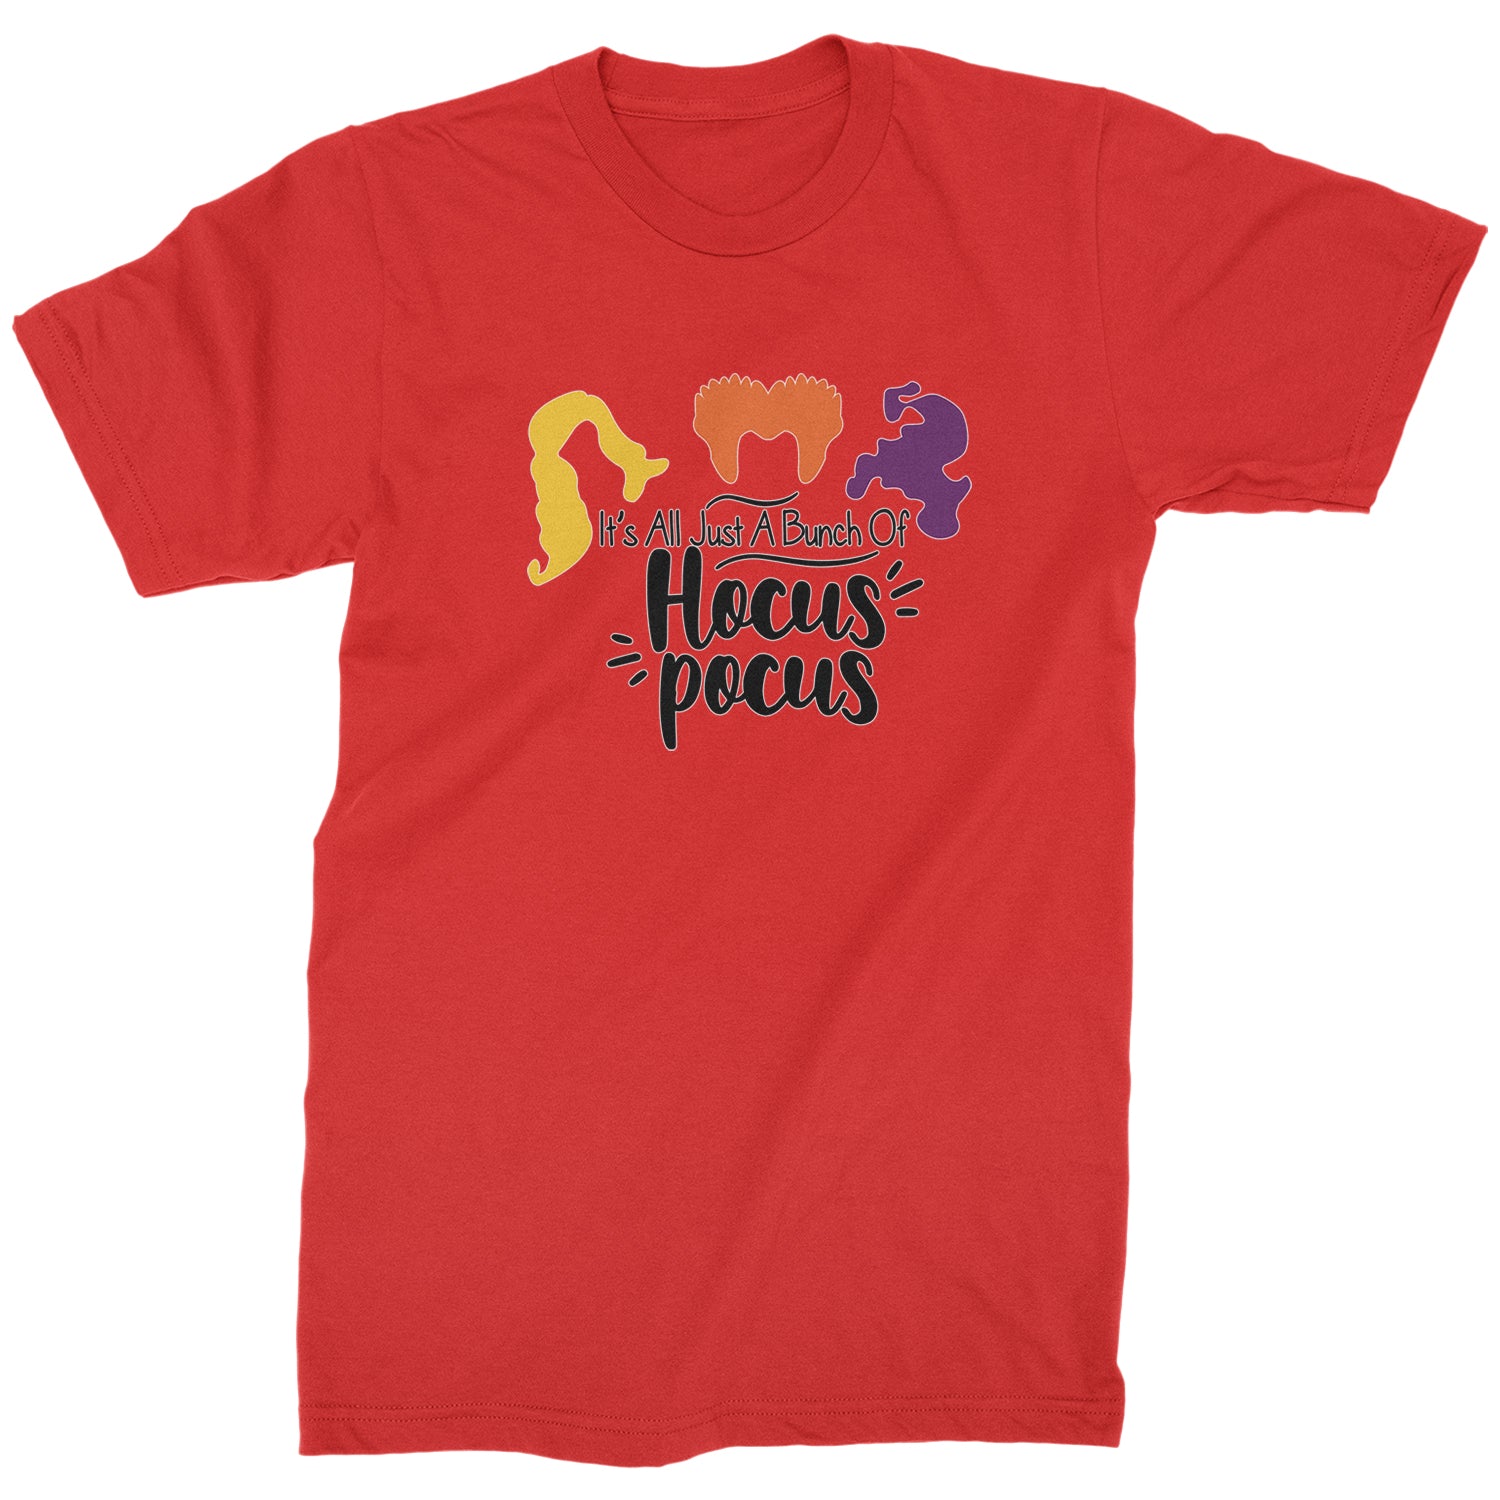 It's Just A Bunch Of Hocus Pocus Mens T-shirt descendants, enchanted, eve, hallows, hocus, or, pocus, sanderson, sisters, treat, trick, witches by Expression Tees